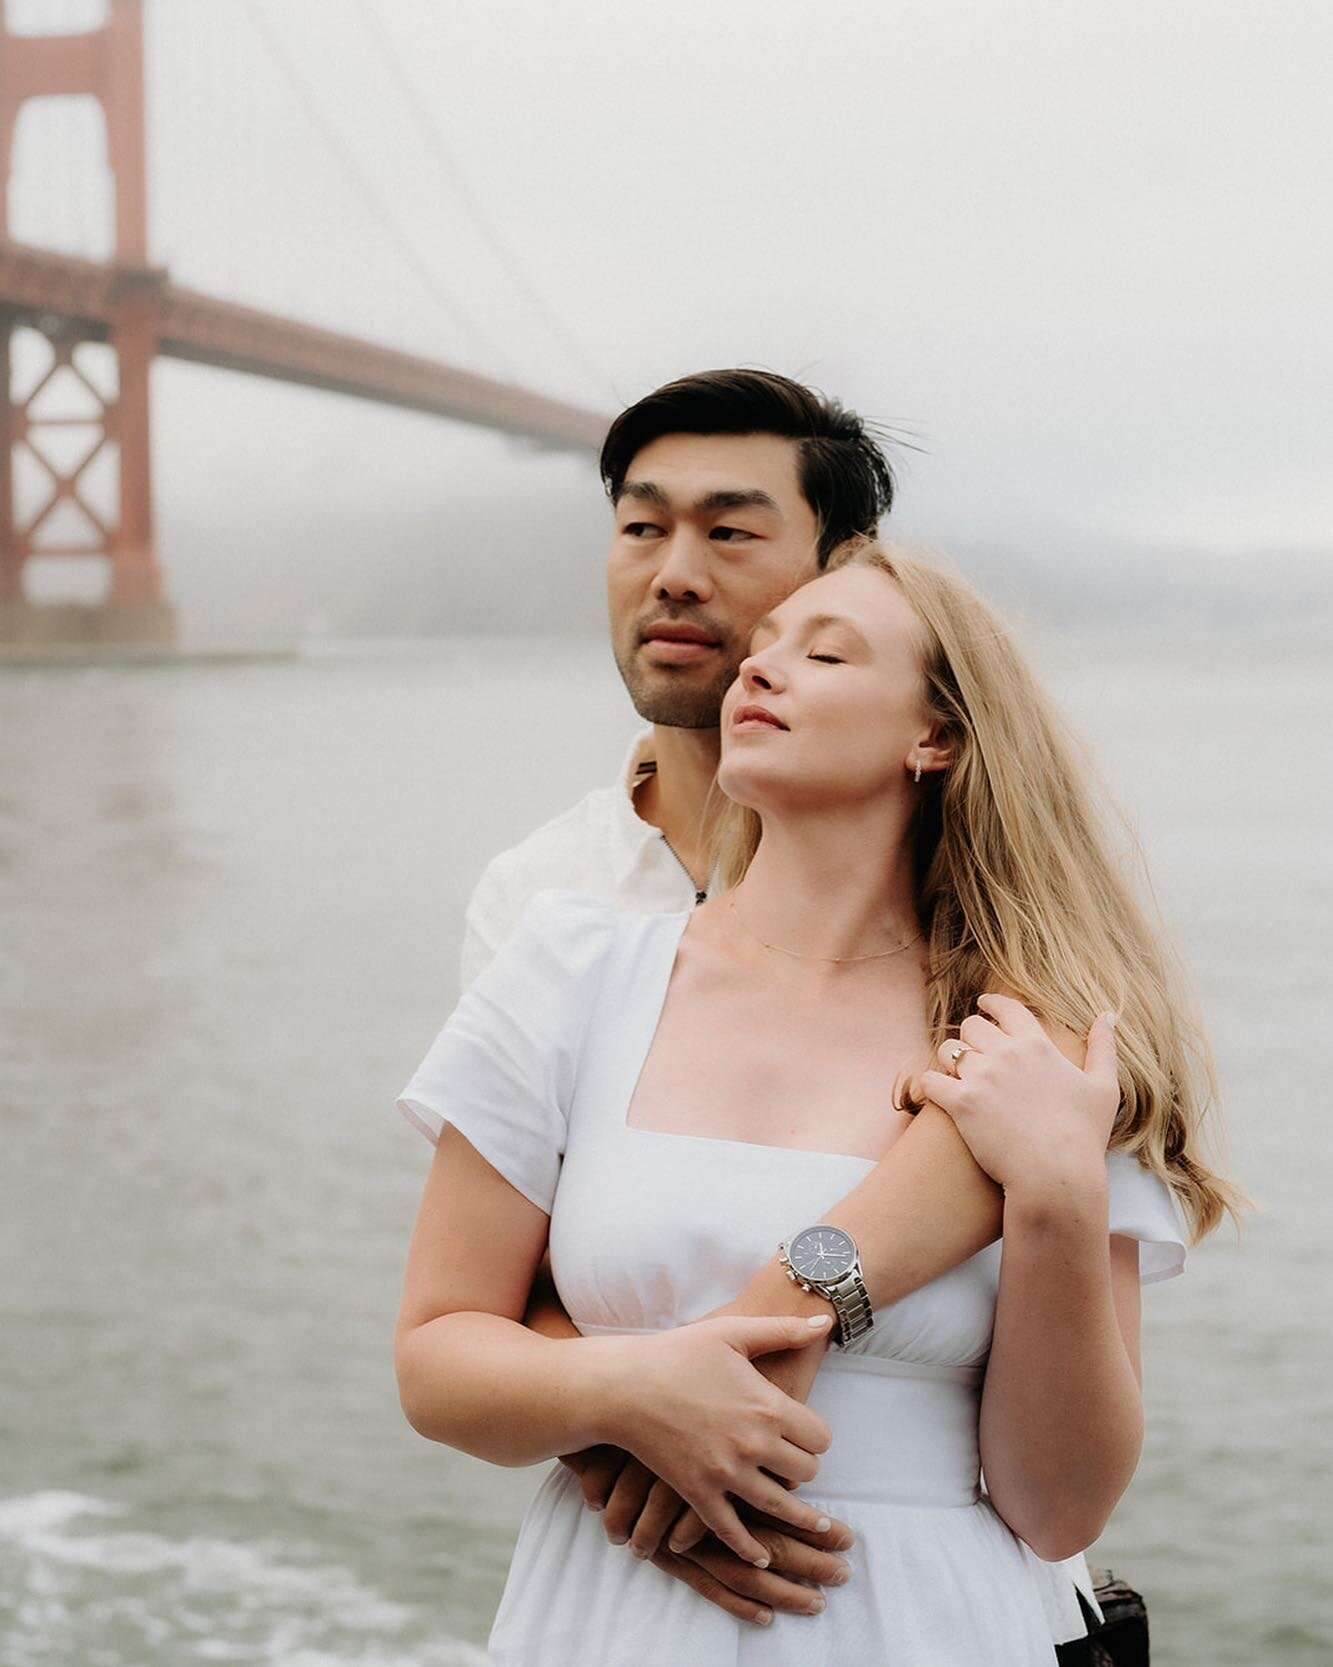 @karlthefog was the third wheel at this engagement session with Natalie and Ben